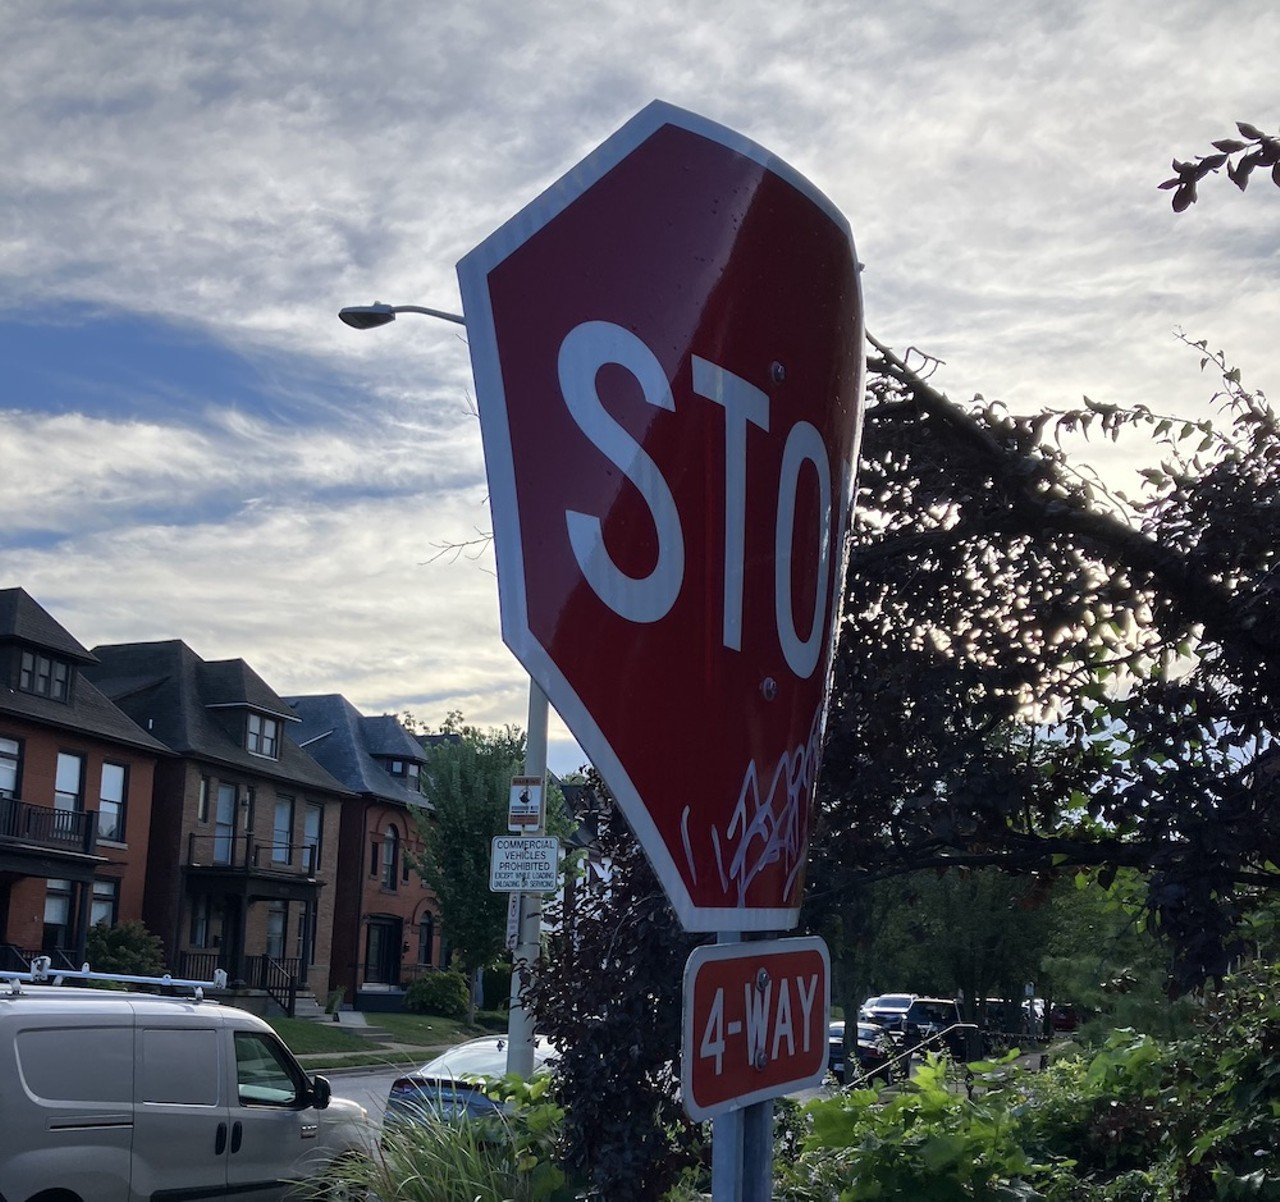 Ignore a stop sign. In this town it’s easy, seeing as how they’re frequently made out of cardboard and wishful budgetary thinking that renders them impossible to see anyway.